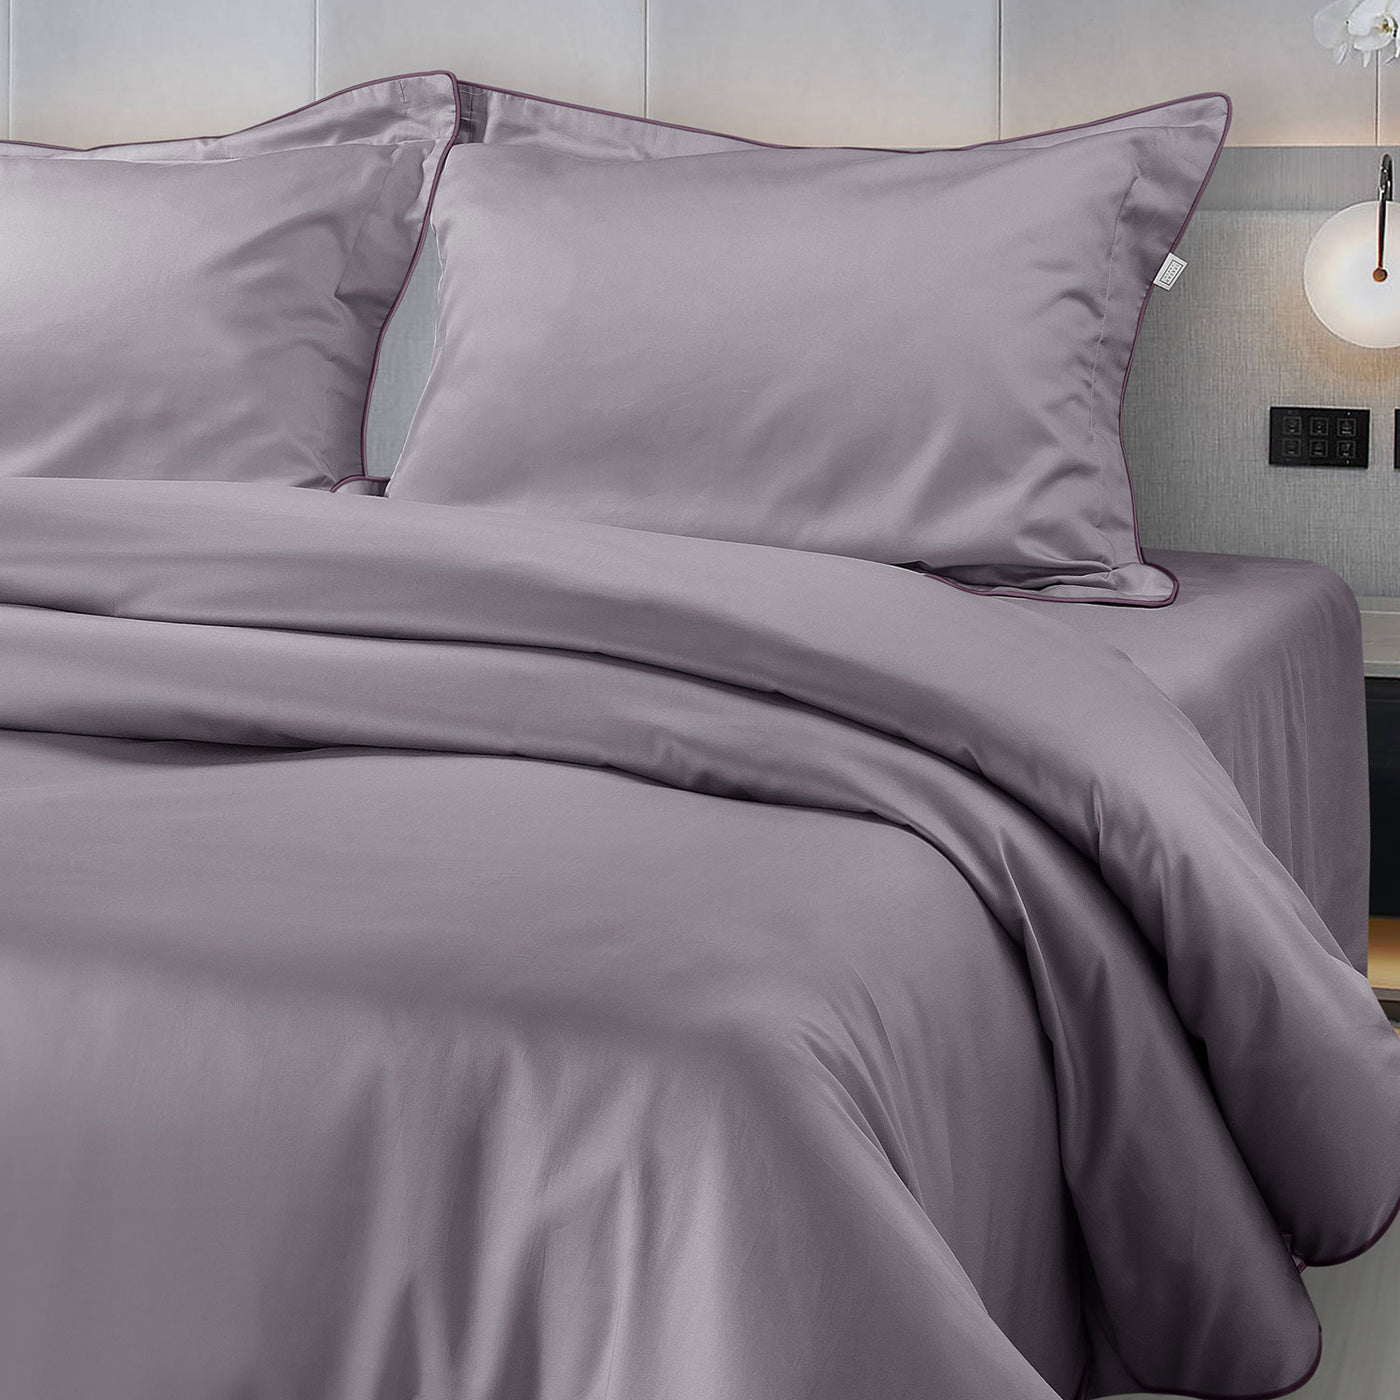 500 THREAD COUNT ITALIAN COTTON LILAC COVERS